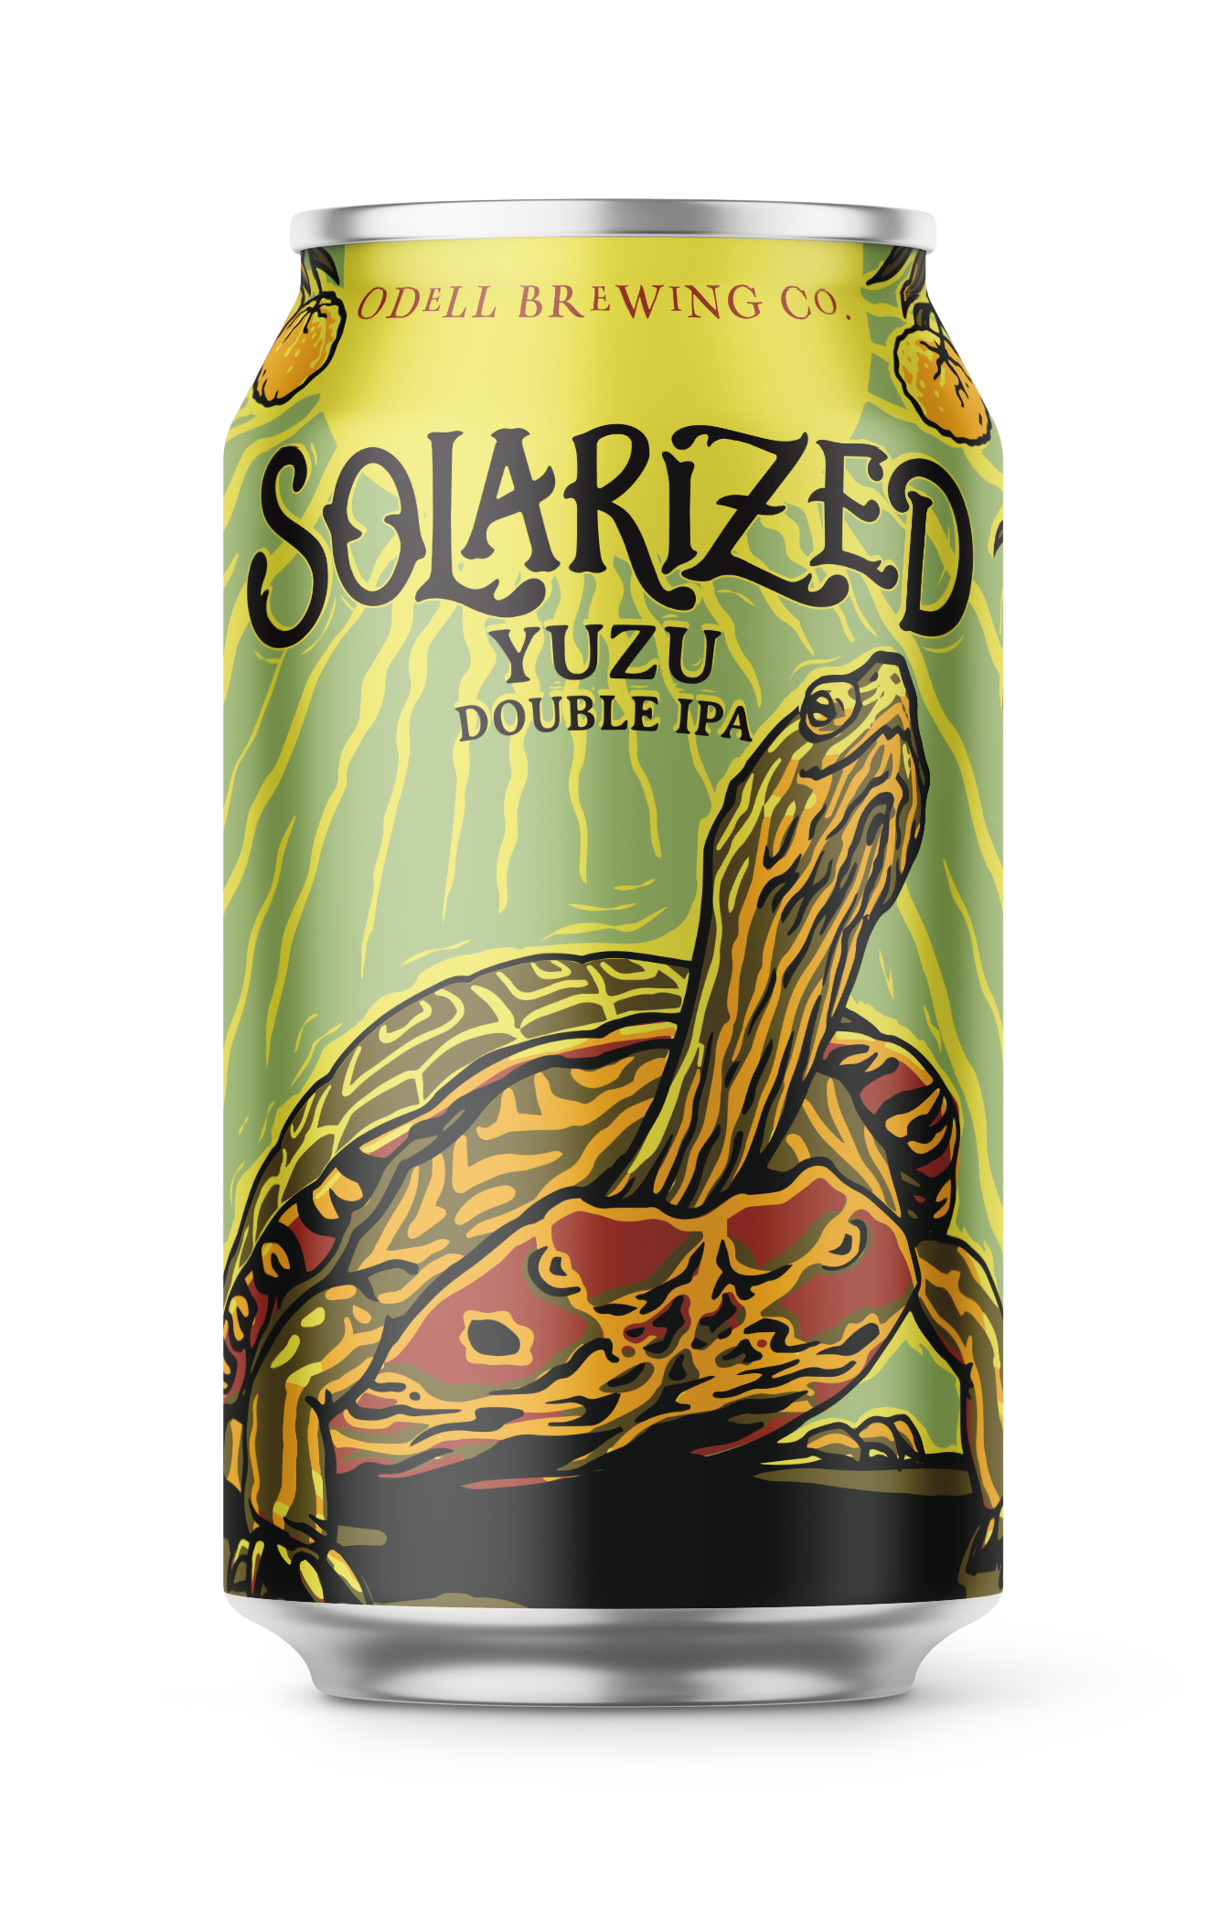 slide 3 of 3, ODELL BREWING CO Odell Brewing Solarized Yuzu Double IPA - 6 Pack 12 fl oz. Cans, 72 fl oz